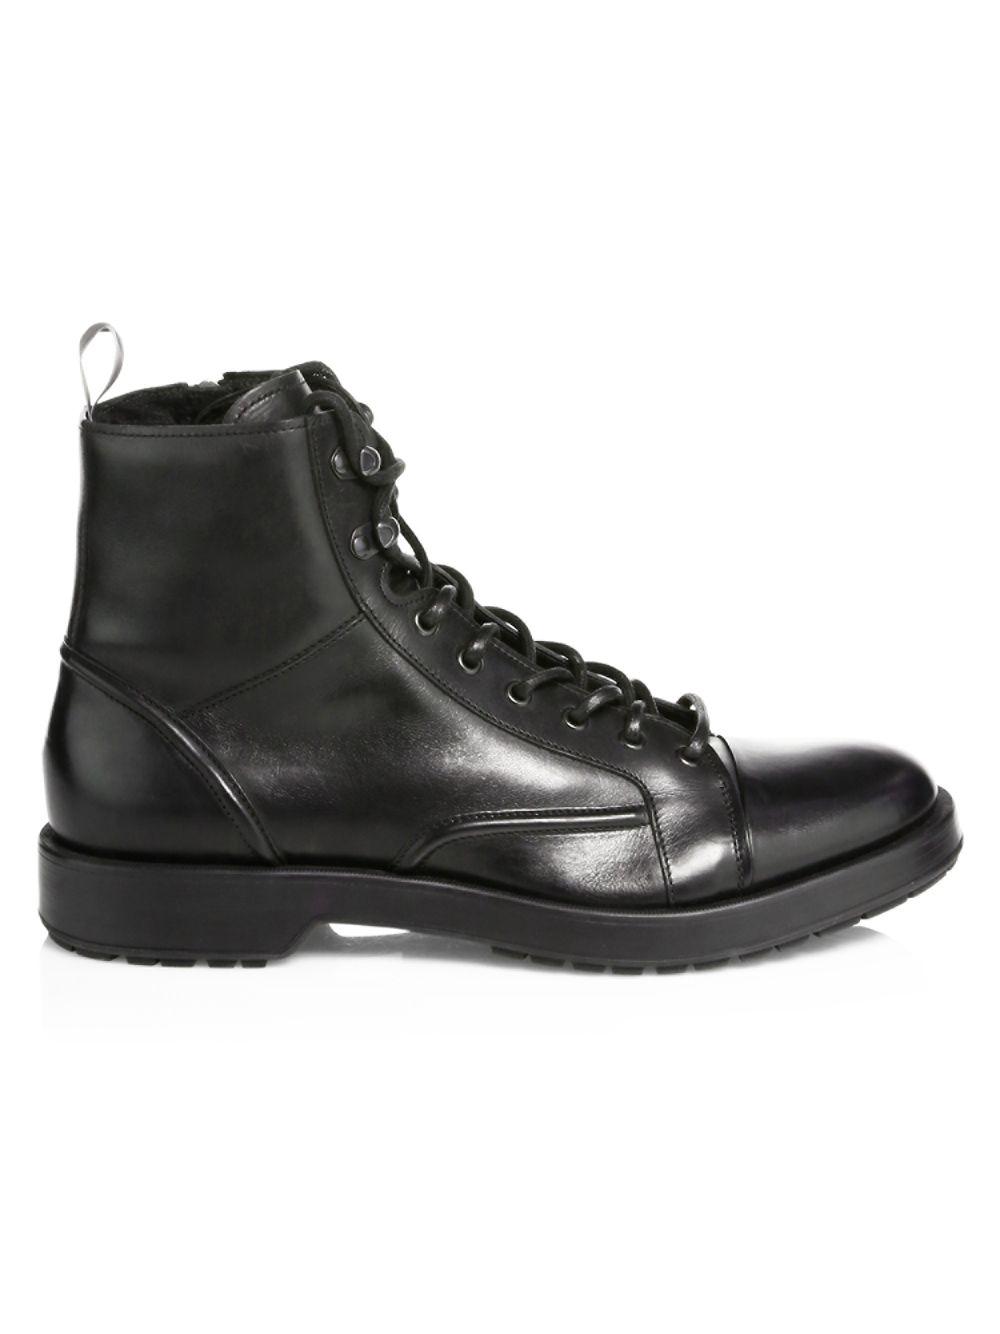 BOSS Montreal Leather Combat Boots in Black for Men - Lyst